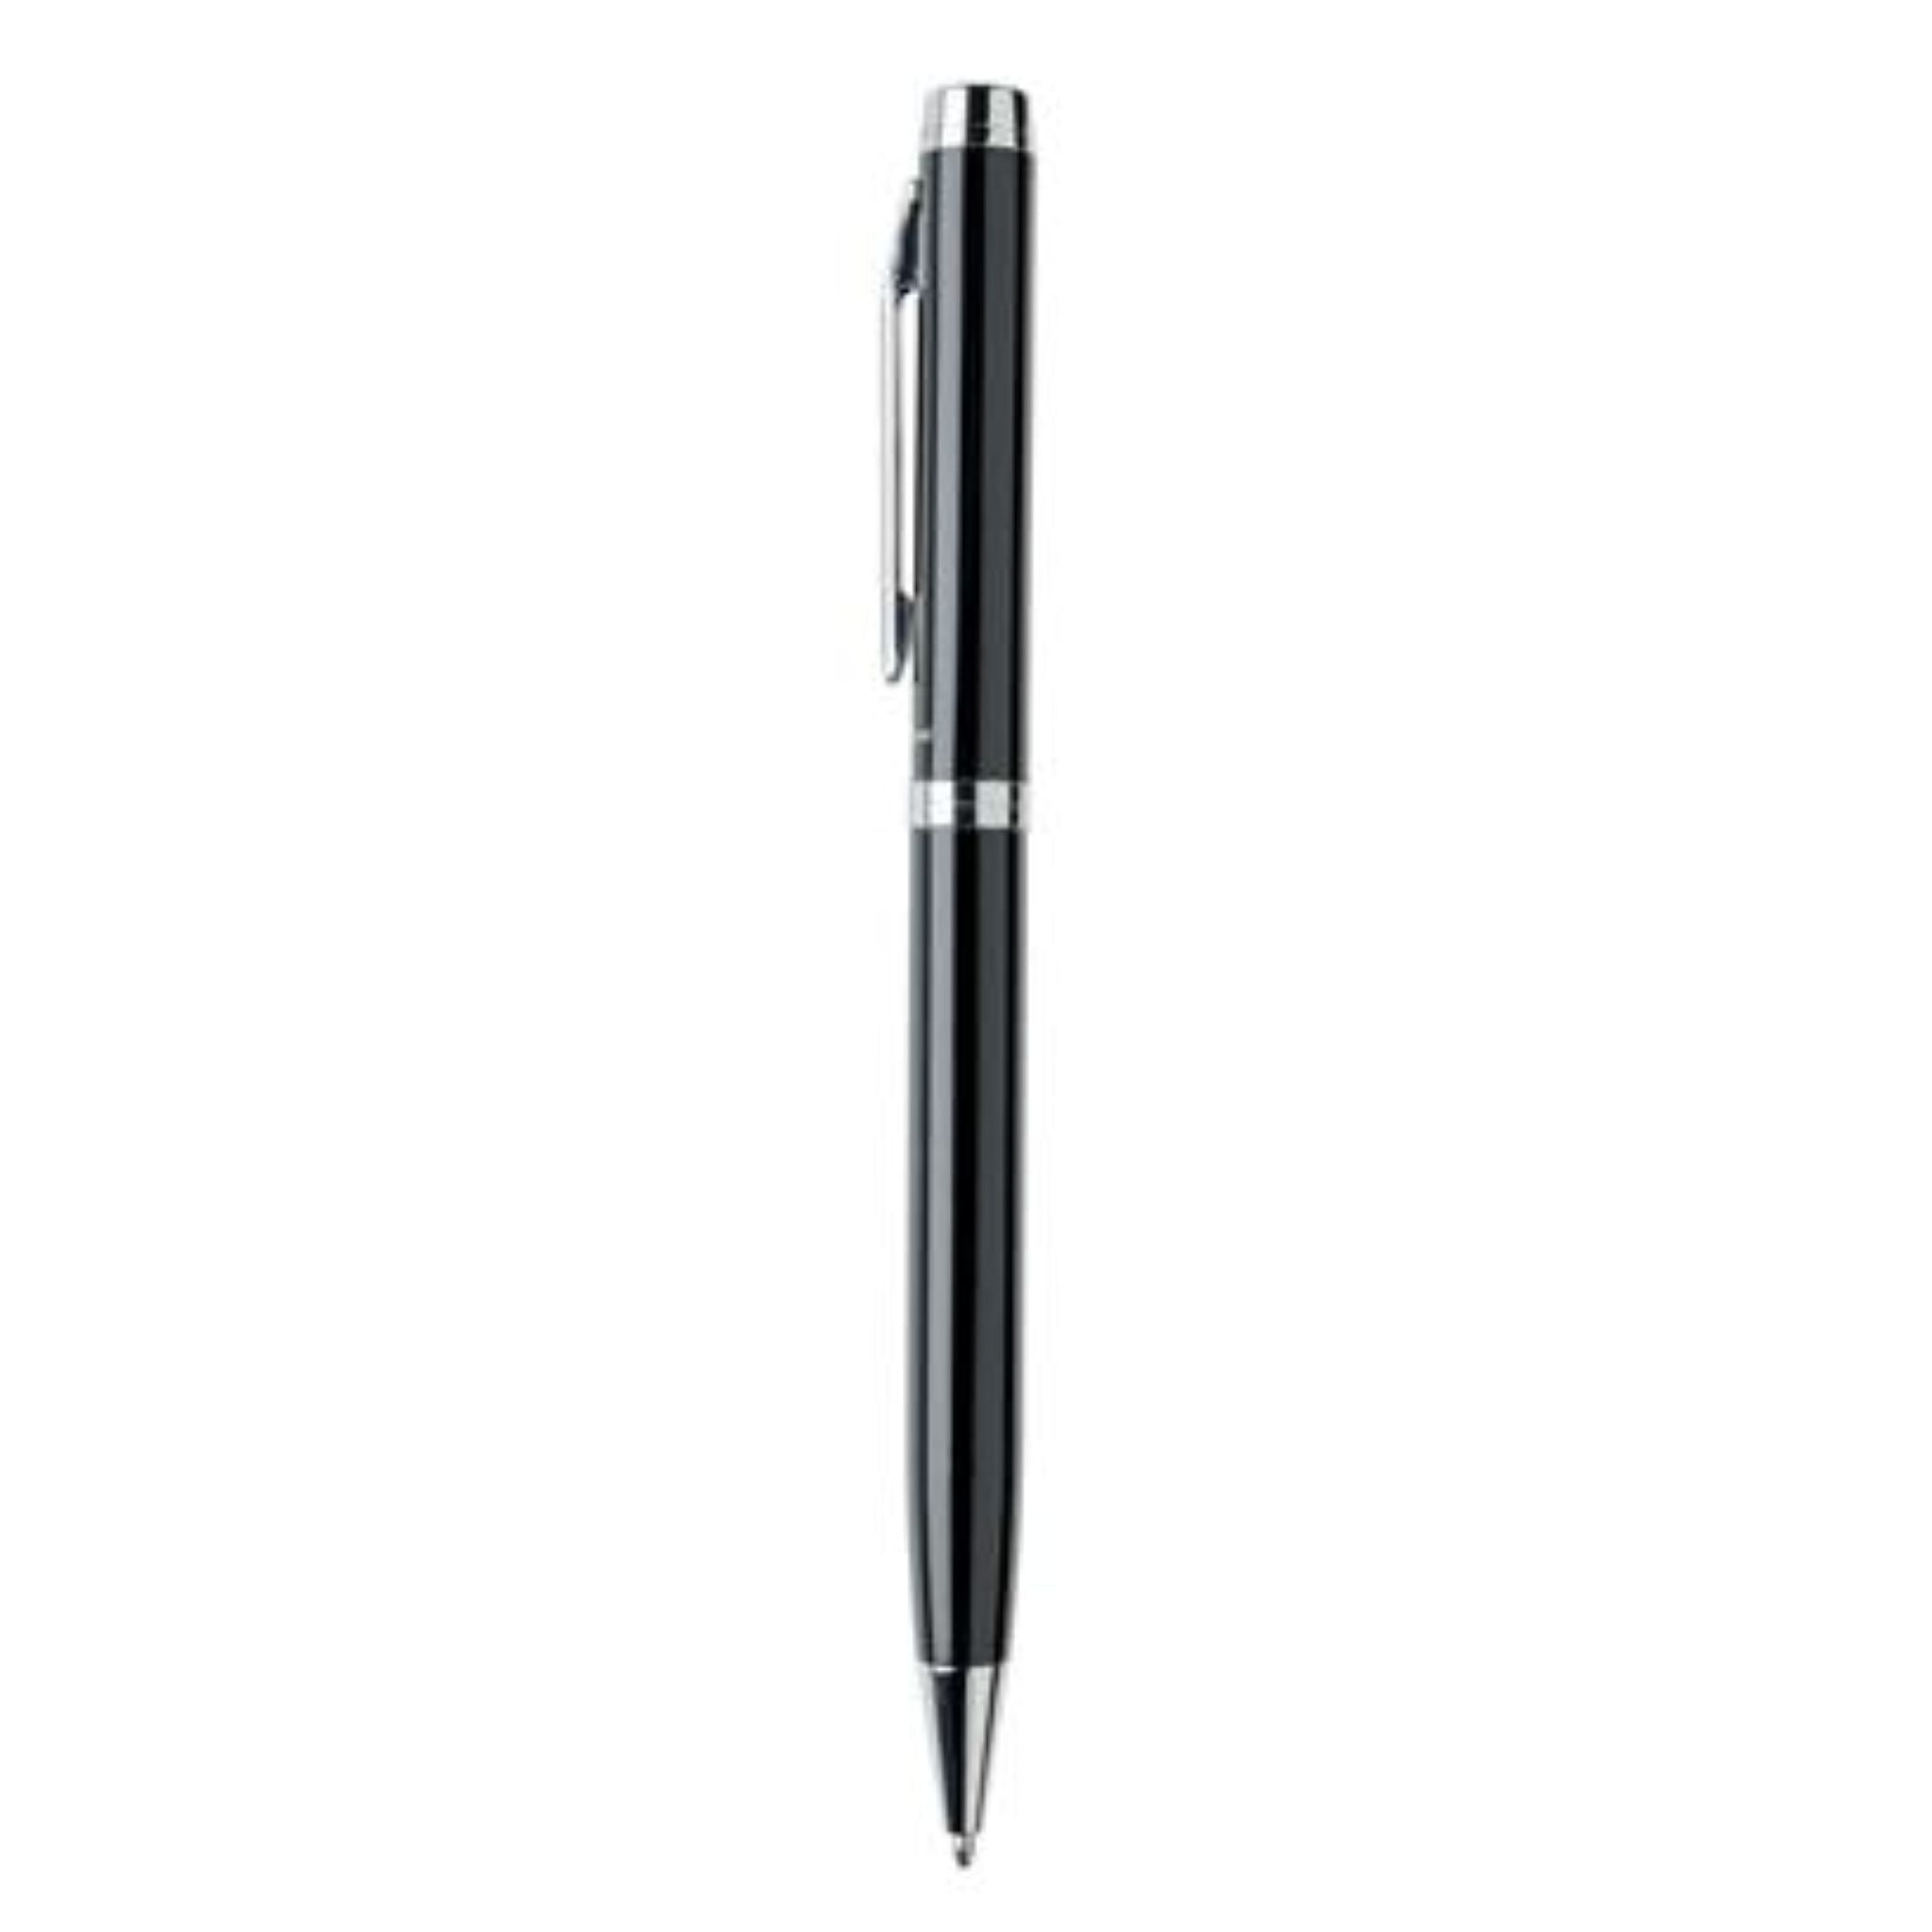 Black and silver pen